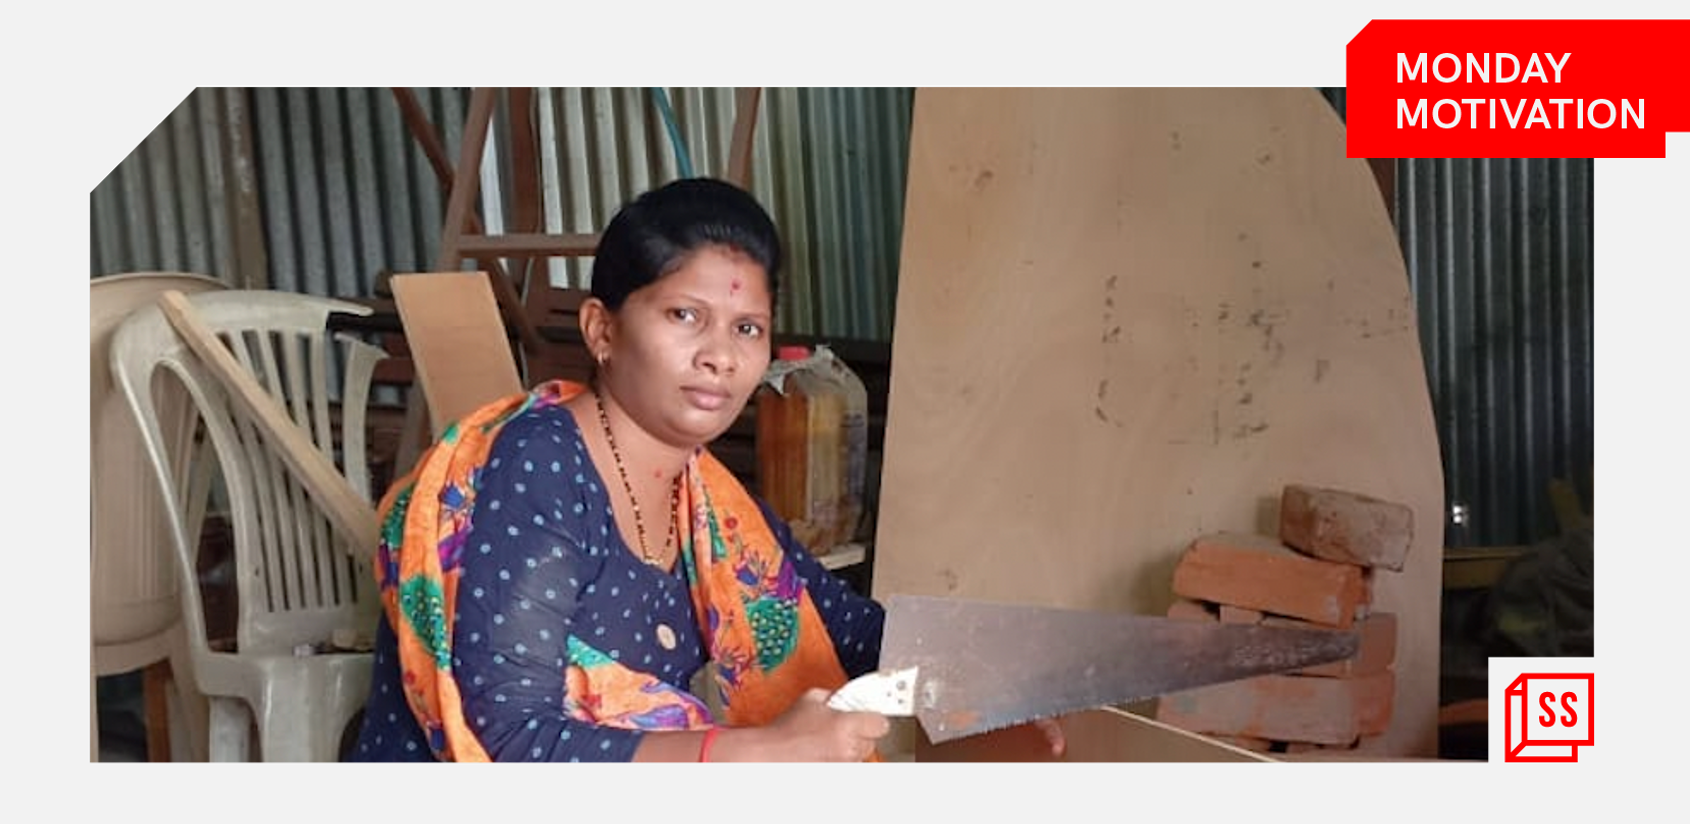 [Monday Motivation] This successful entrepreneur is the only woman carpenter in her village

